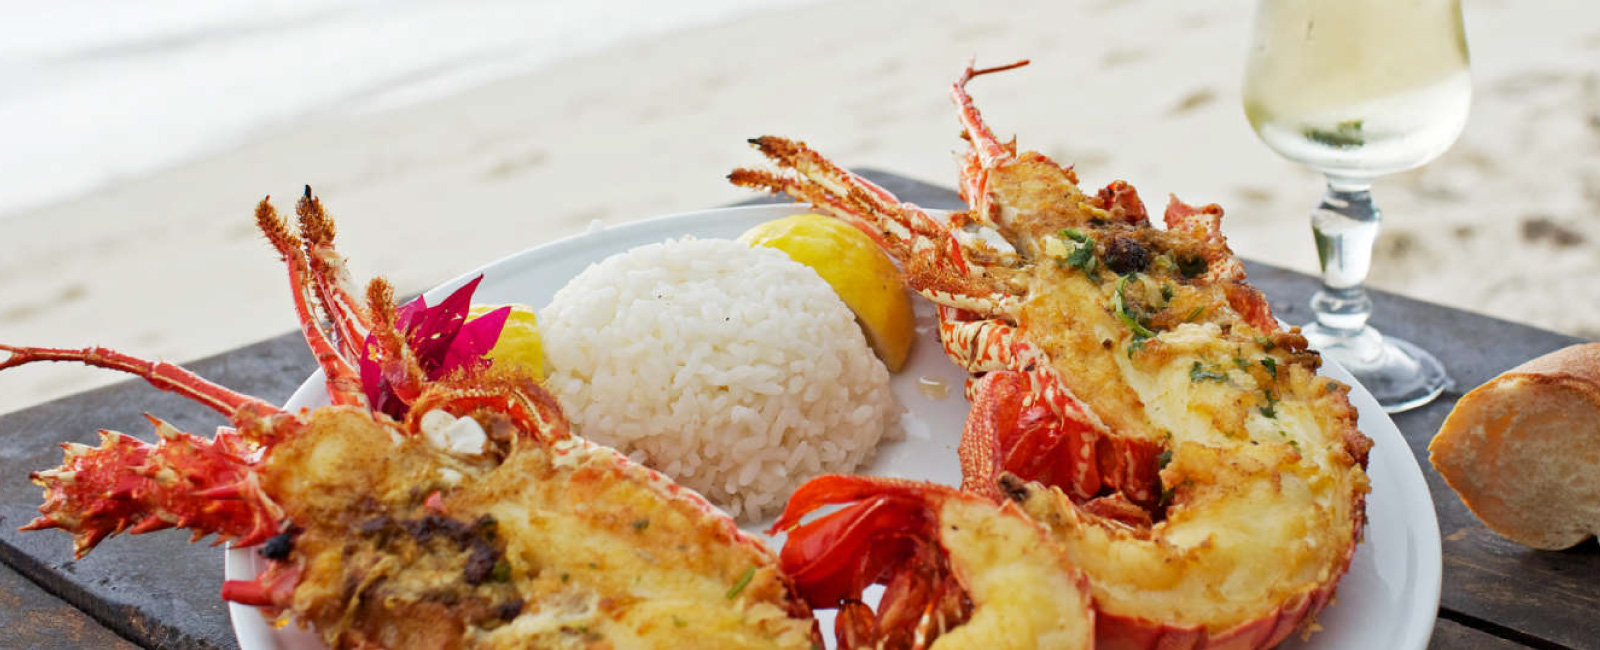 New Caledonian Seafood and Crustaceans 